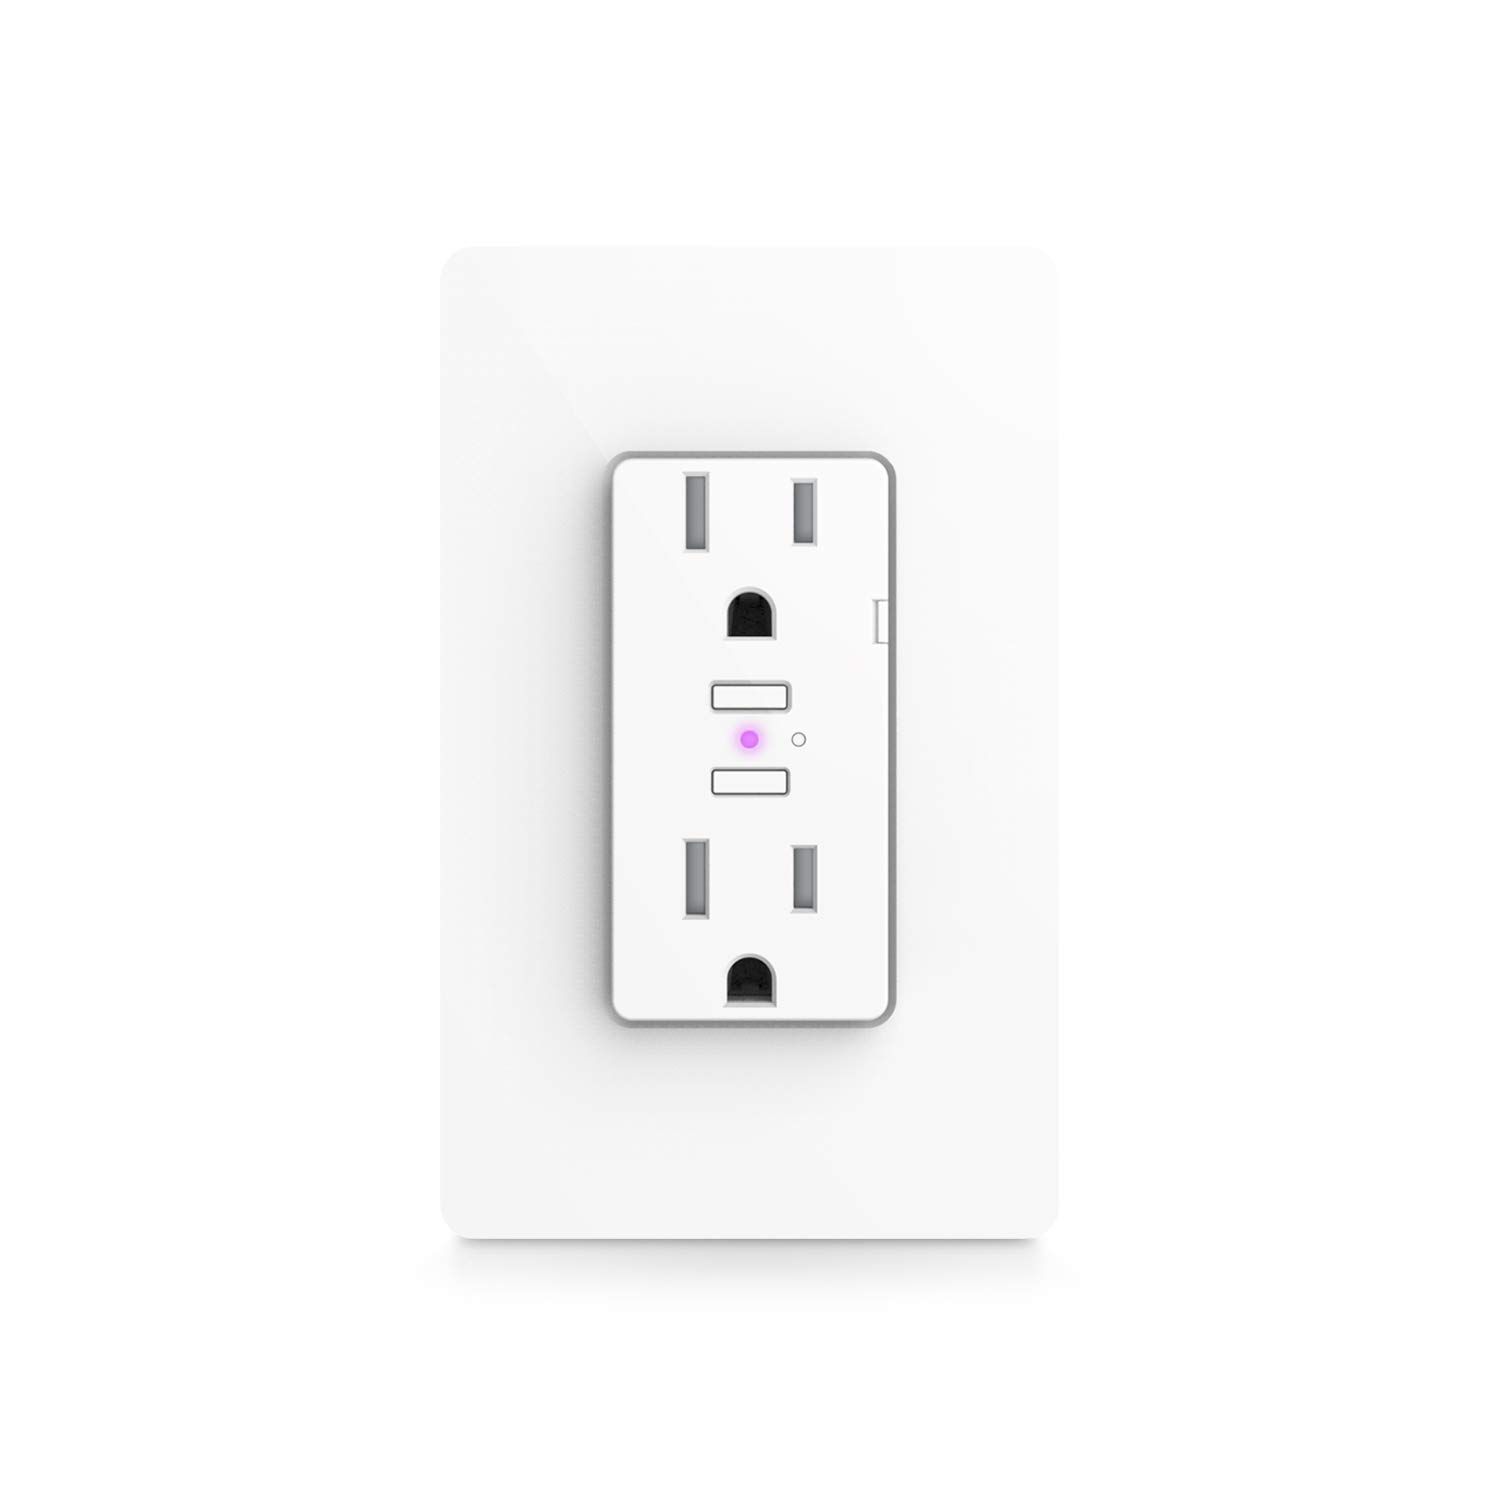 iDevices Wall Outlet - Wi-Fi enabled smart outlet; Works with Alexa, Siri, & the Google Assistant | Amazon (US)